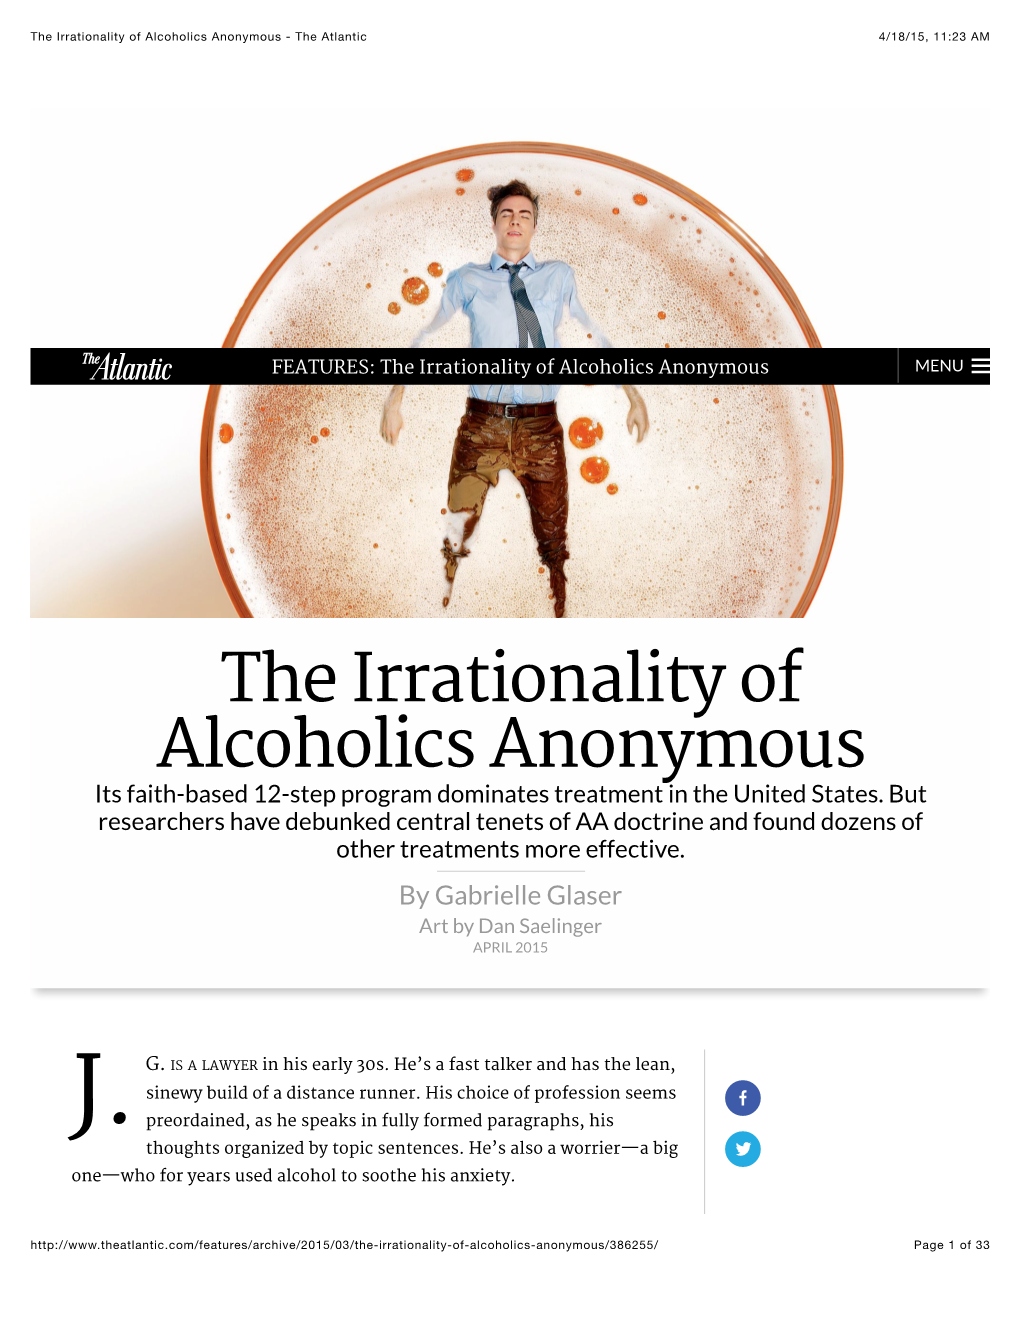 The Irrationality of Alcoholics Anonymous - the Atlantic 4/18/15, 11:23 AM